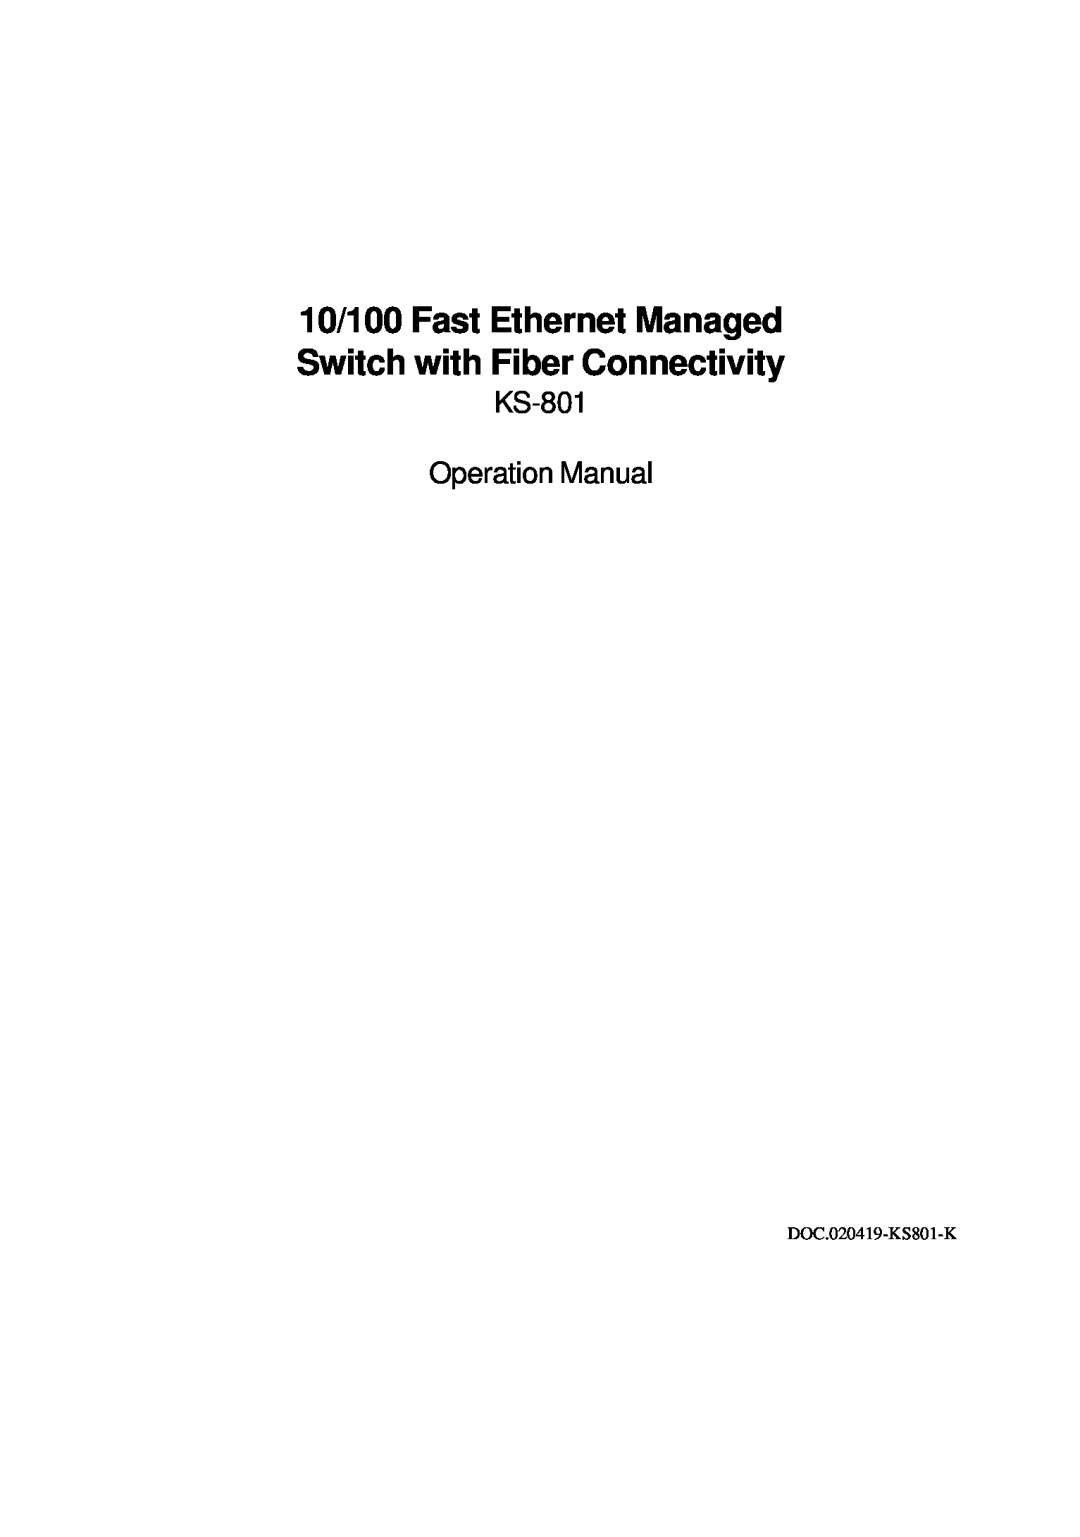 Xerox KS-801 operation manual 10/100 Fast Ethernet Managed Switch with Fiber Connectivity, DOC.020419-KS801-K 